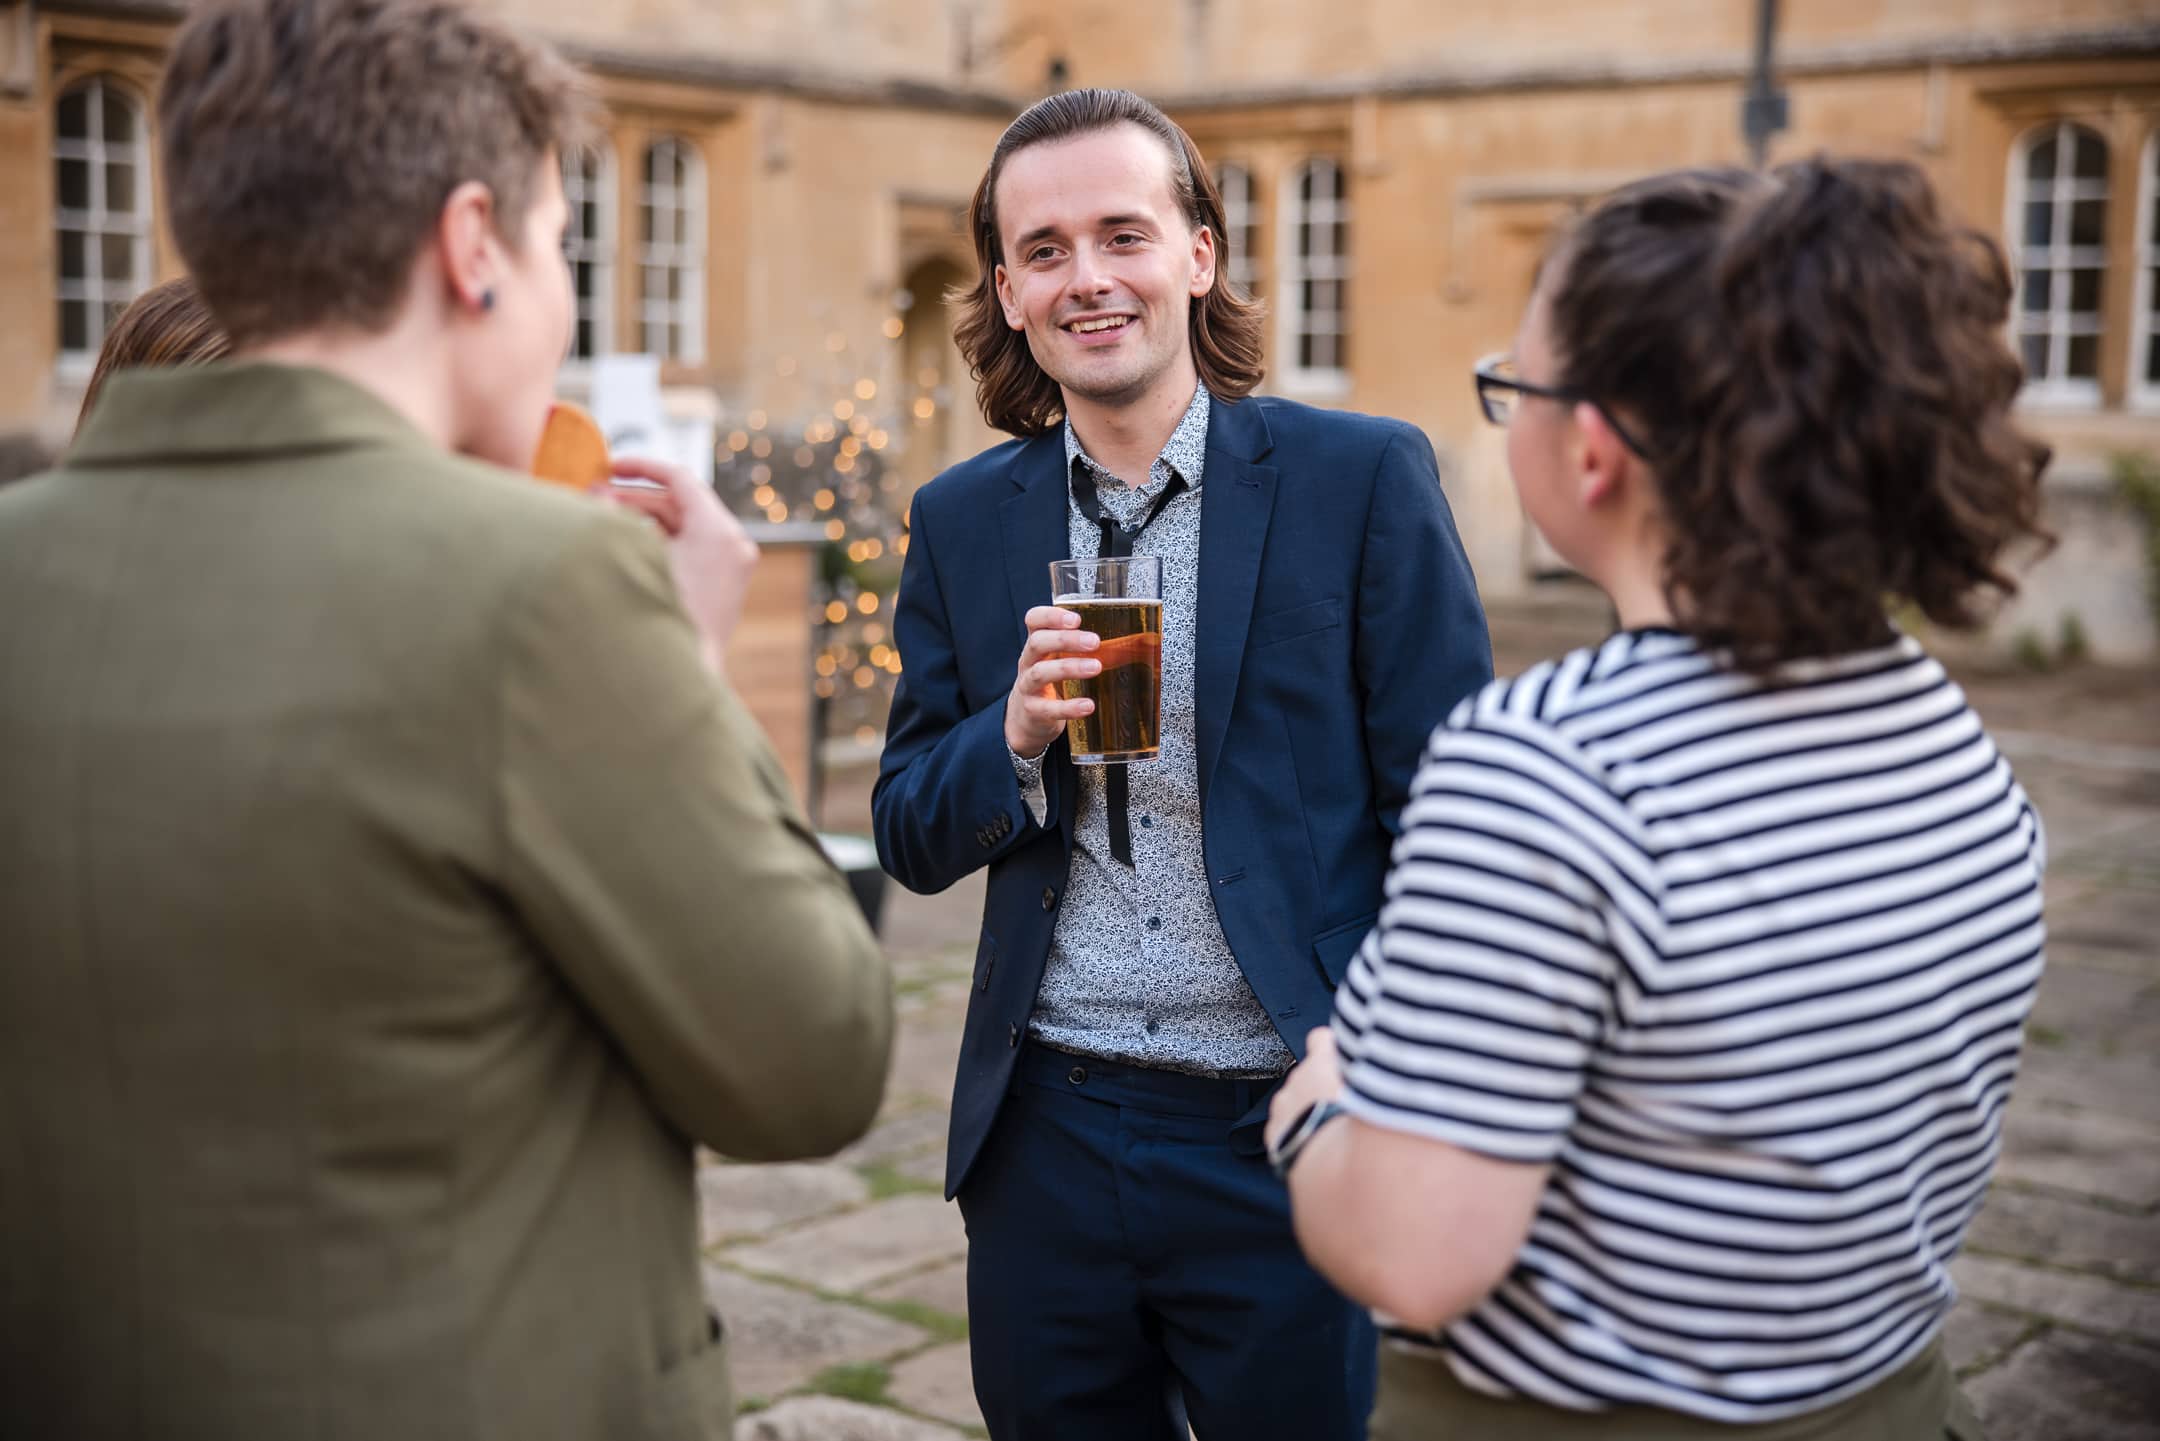 Guests talking in the Quad at Corpus Christi College Oxford